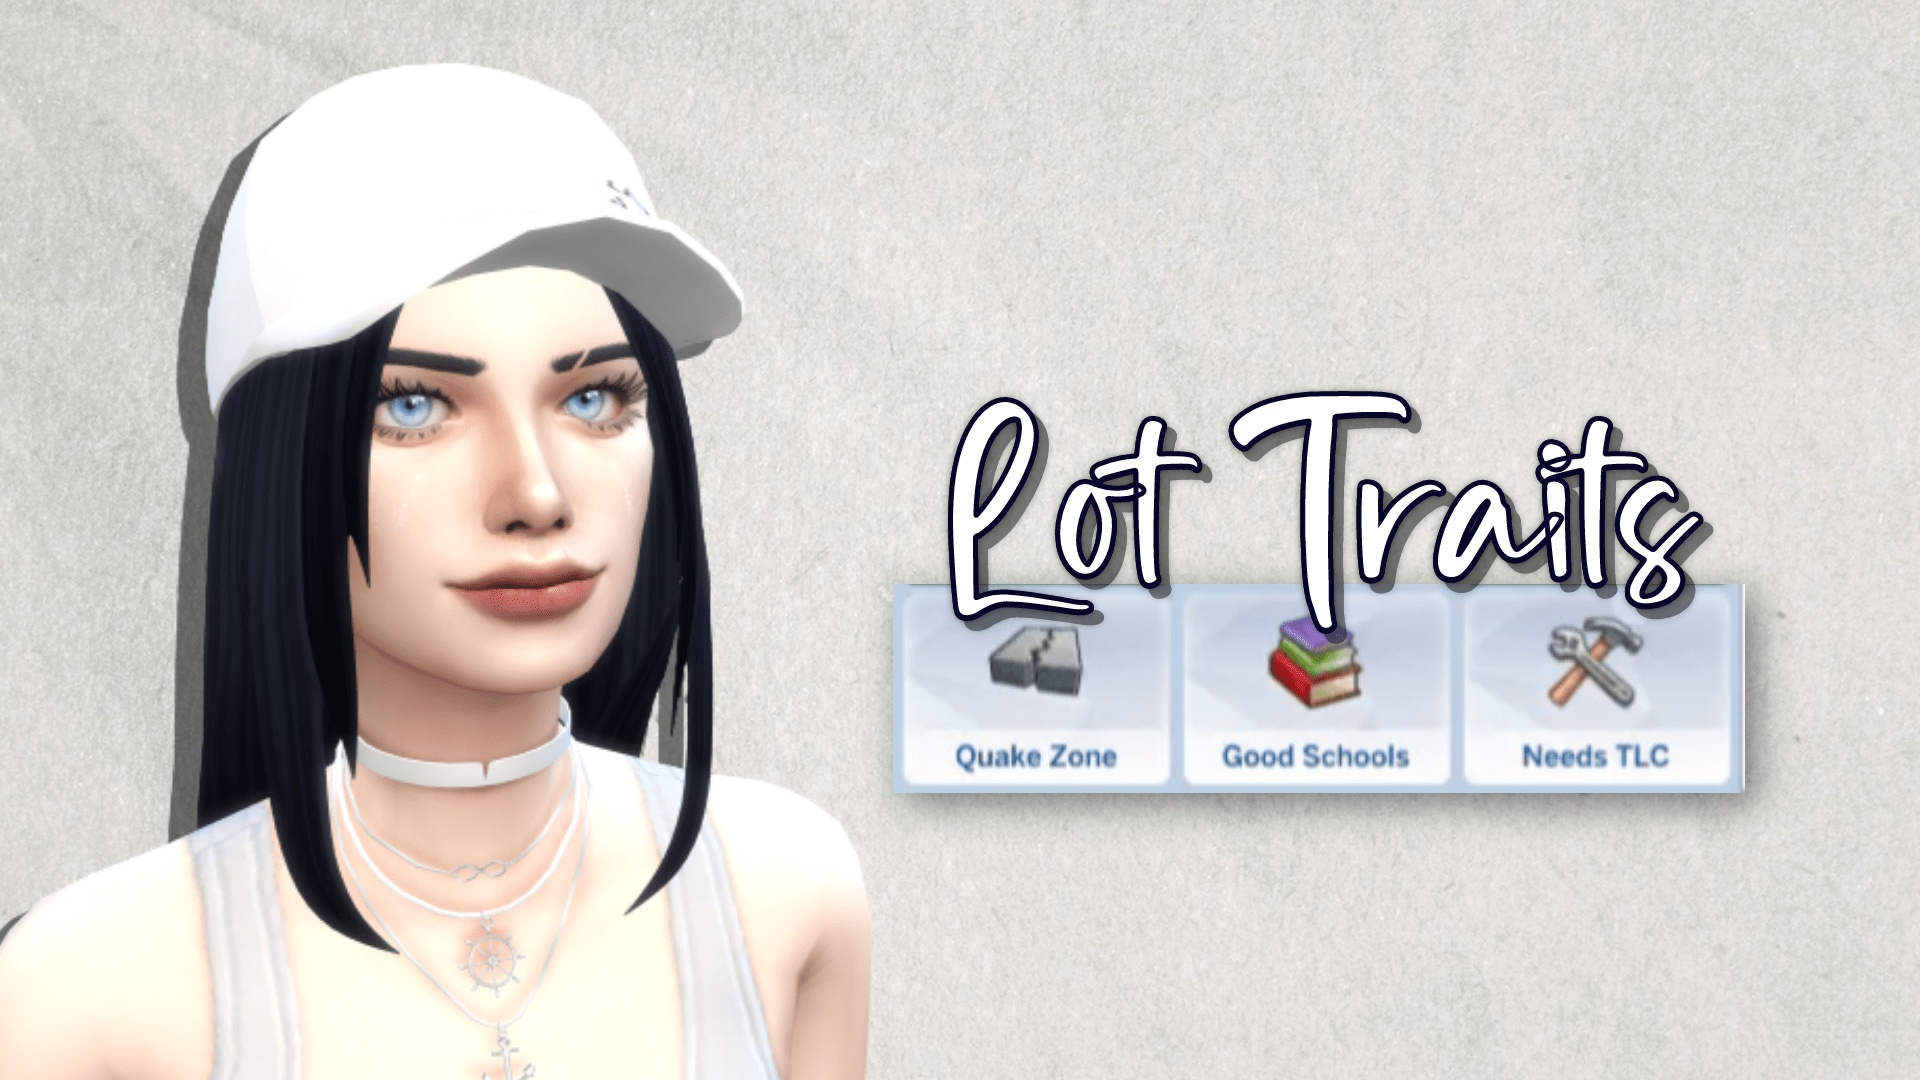 Lot Traits - The Sims 4 Guide - IGN